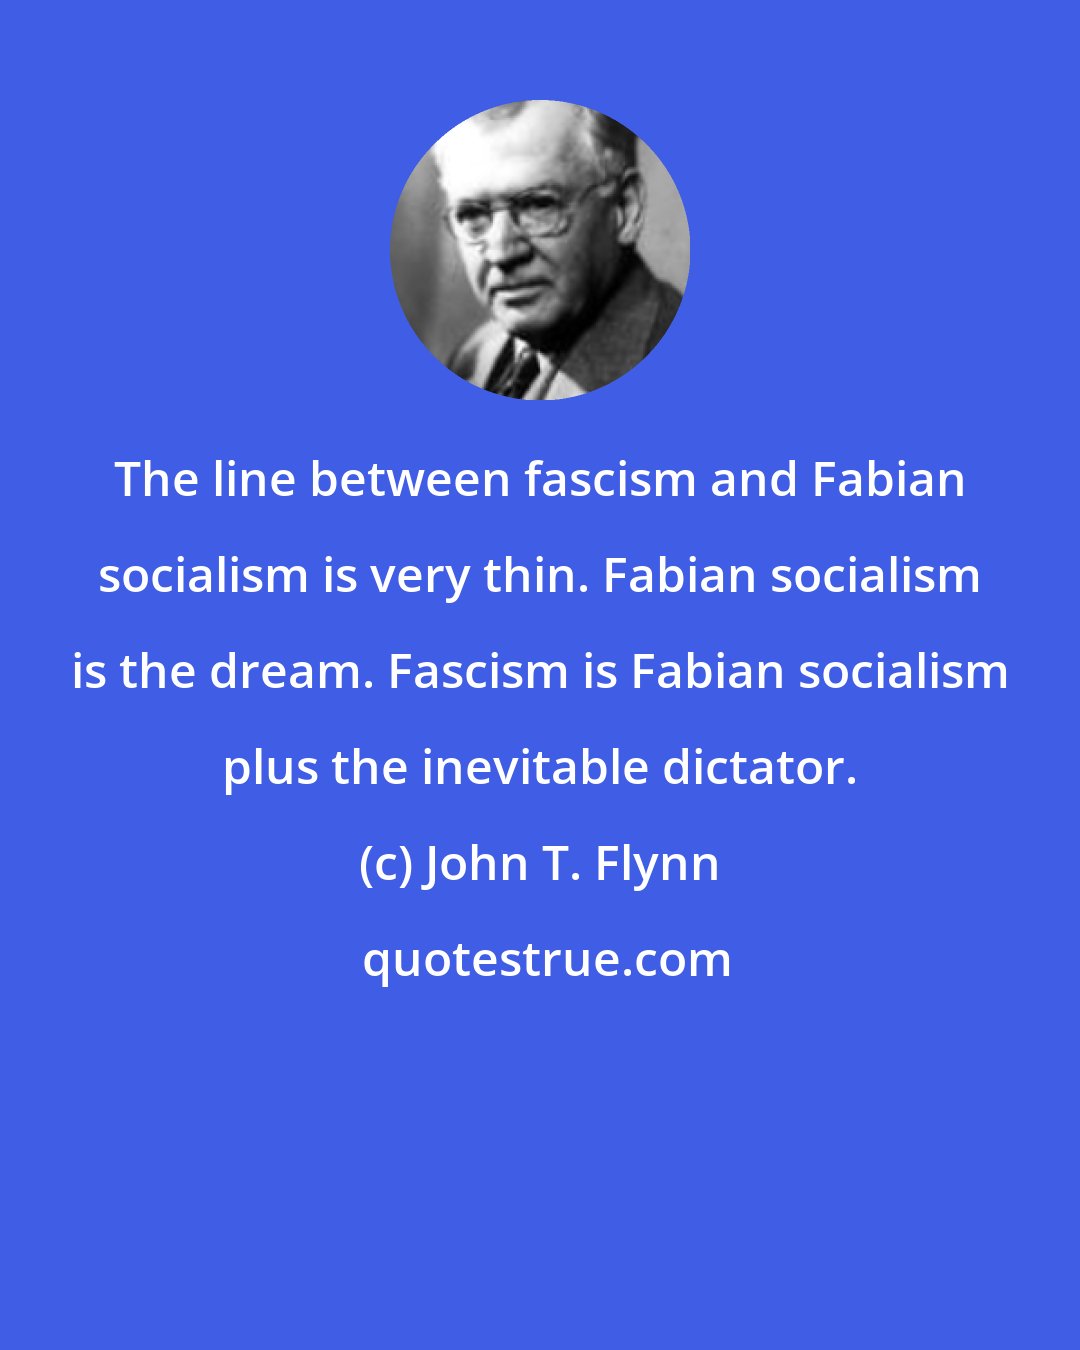 John T. Flynn: The line between fascism and Fabian socialism is very thin. Fabian socialism is the dream. Fascism is Fabian socialism plus the inevitable dictator.